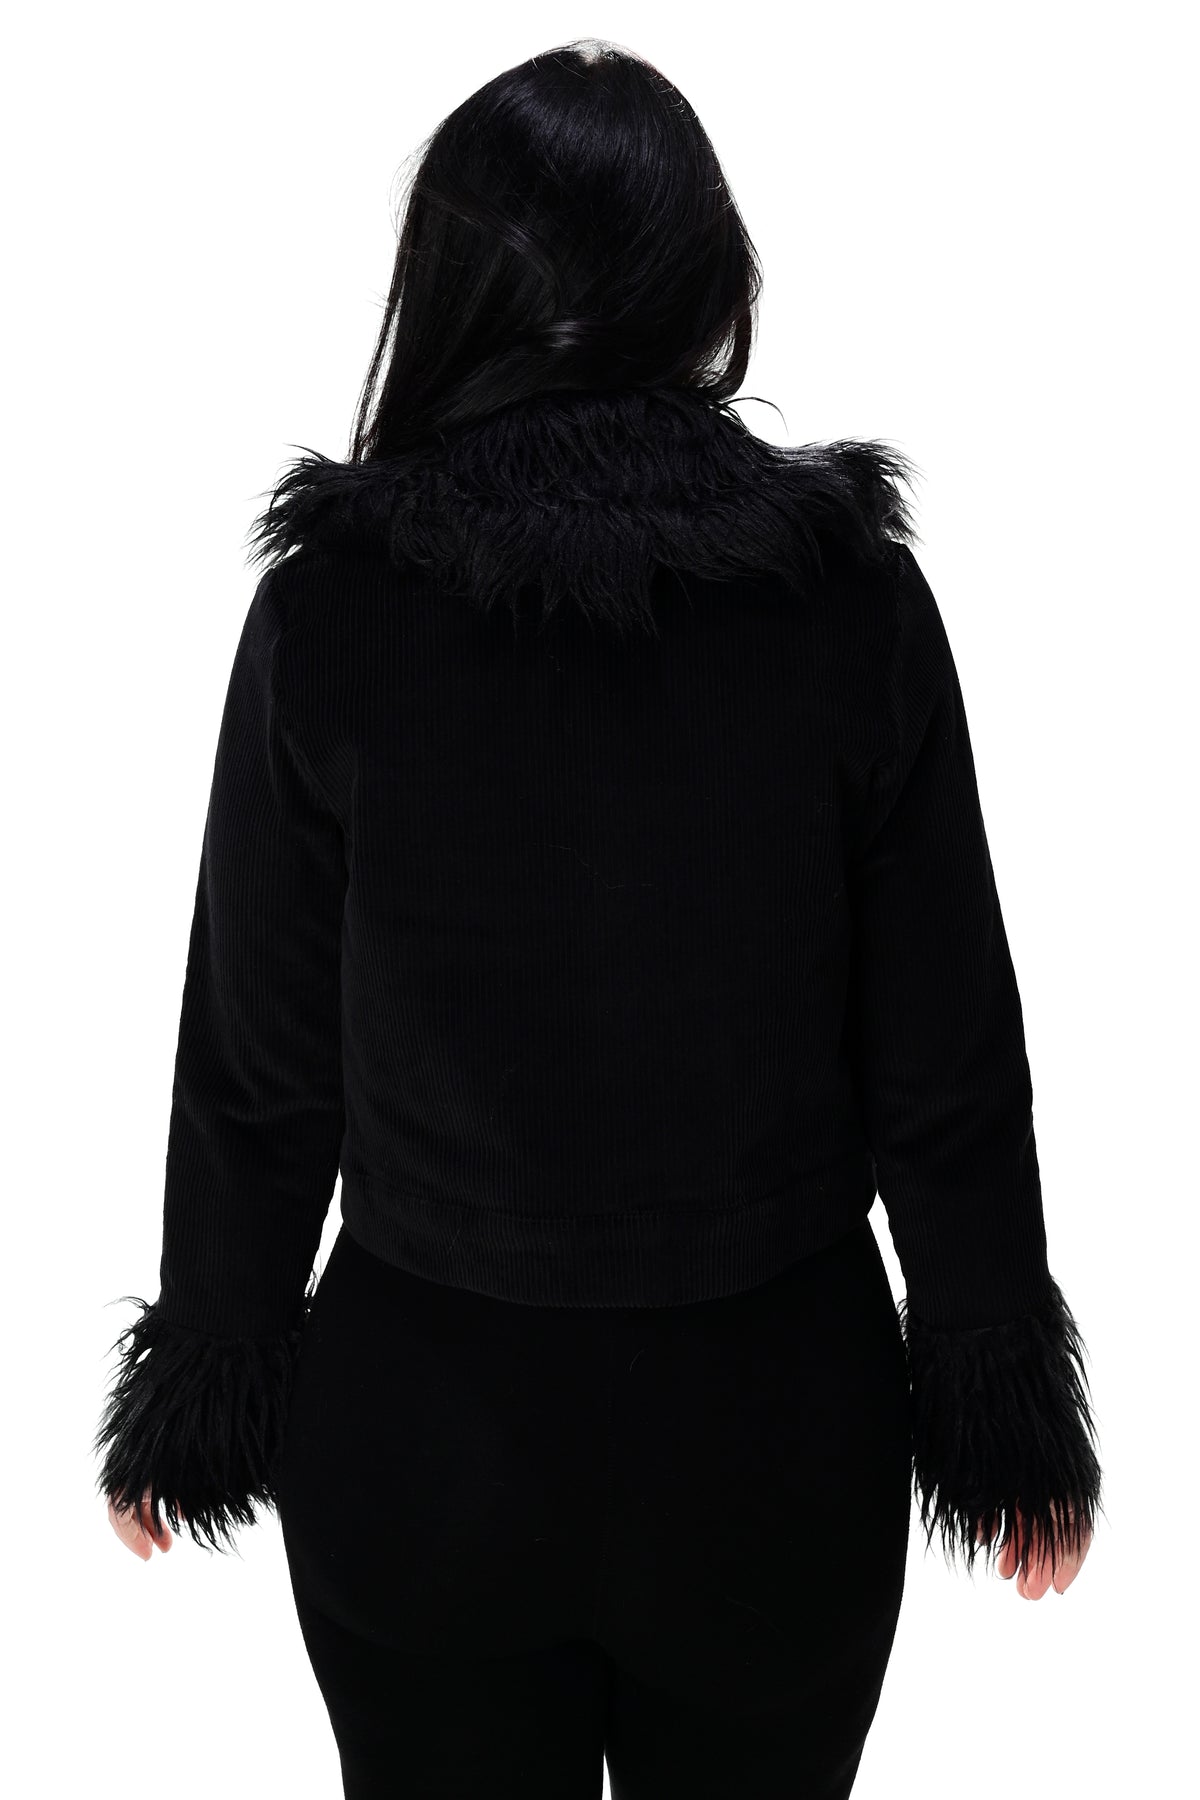 black corduroy button up jacket with black shaggy faux fur on the collar and cuffs